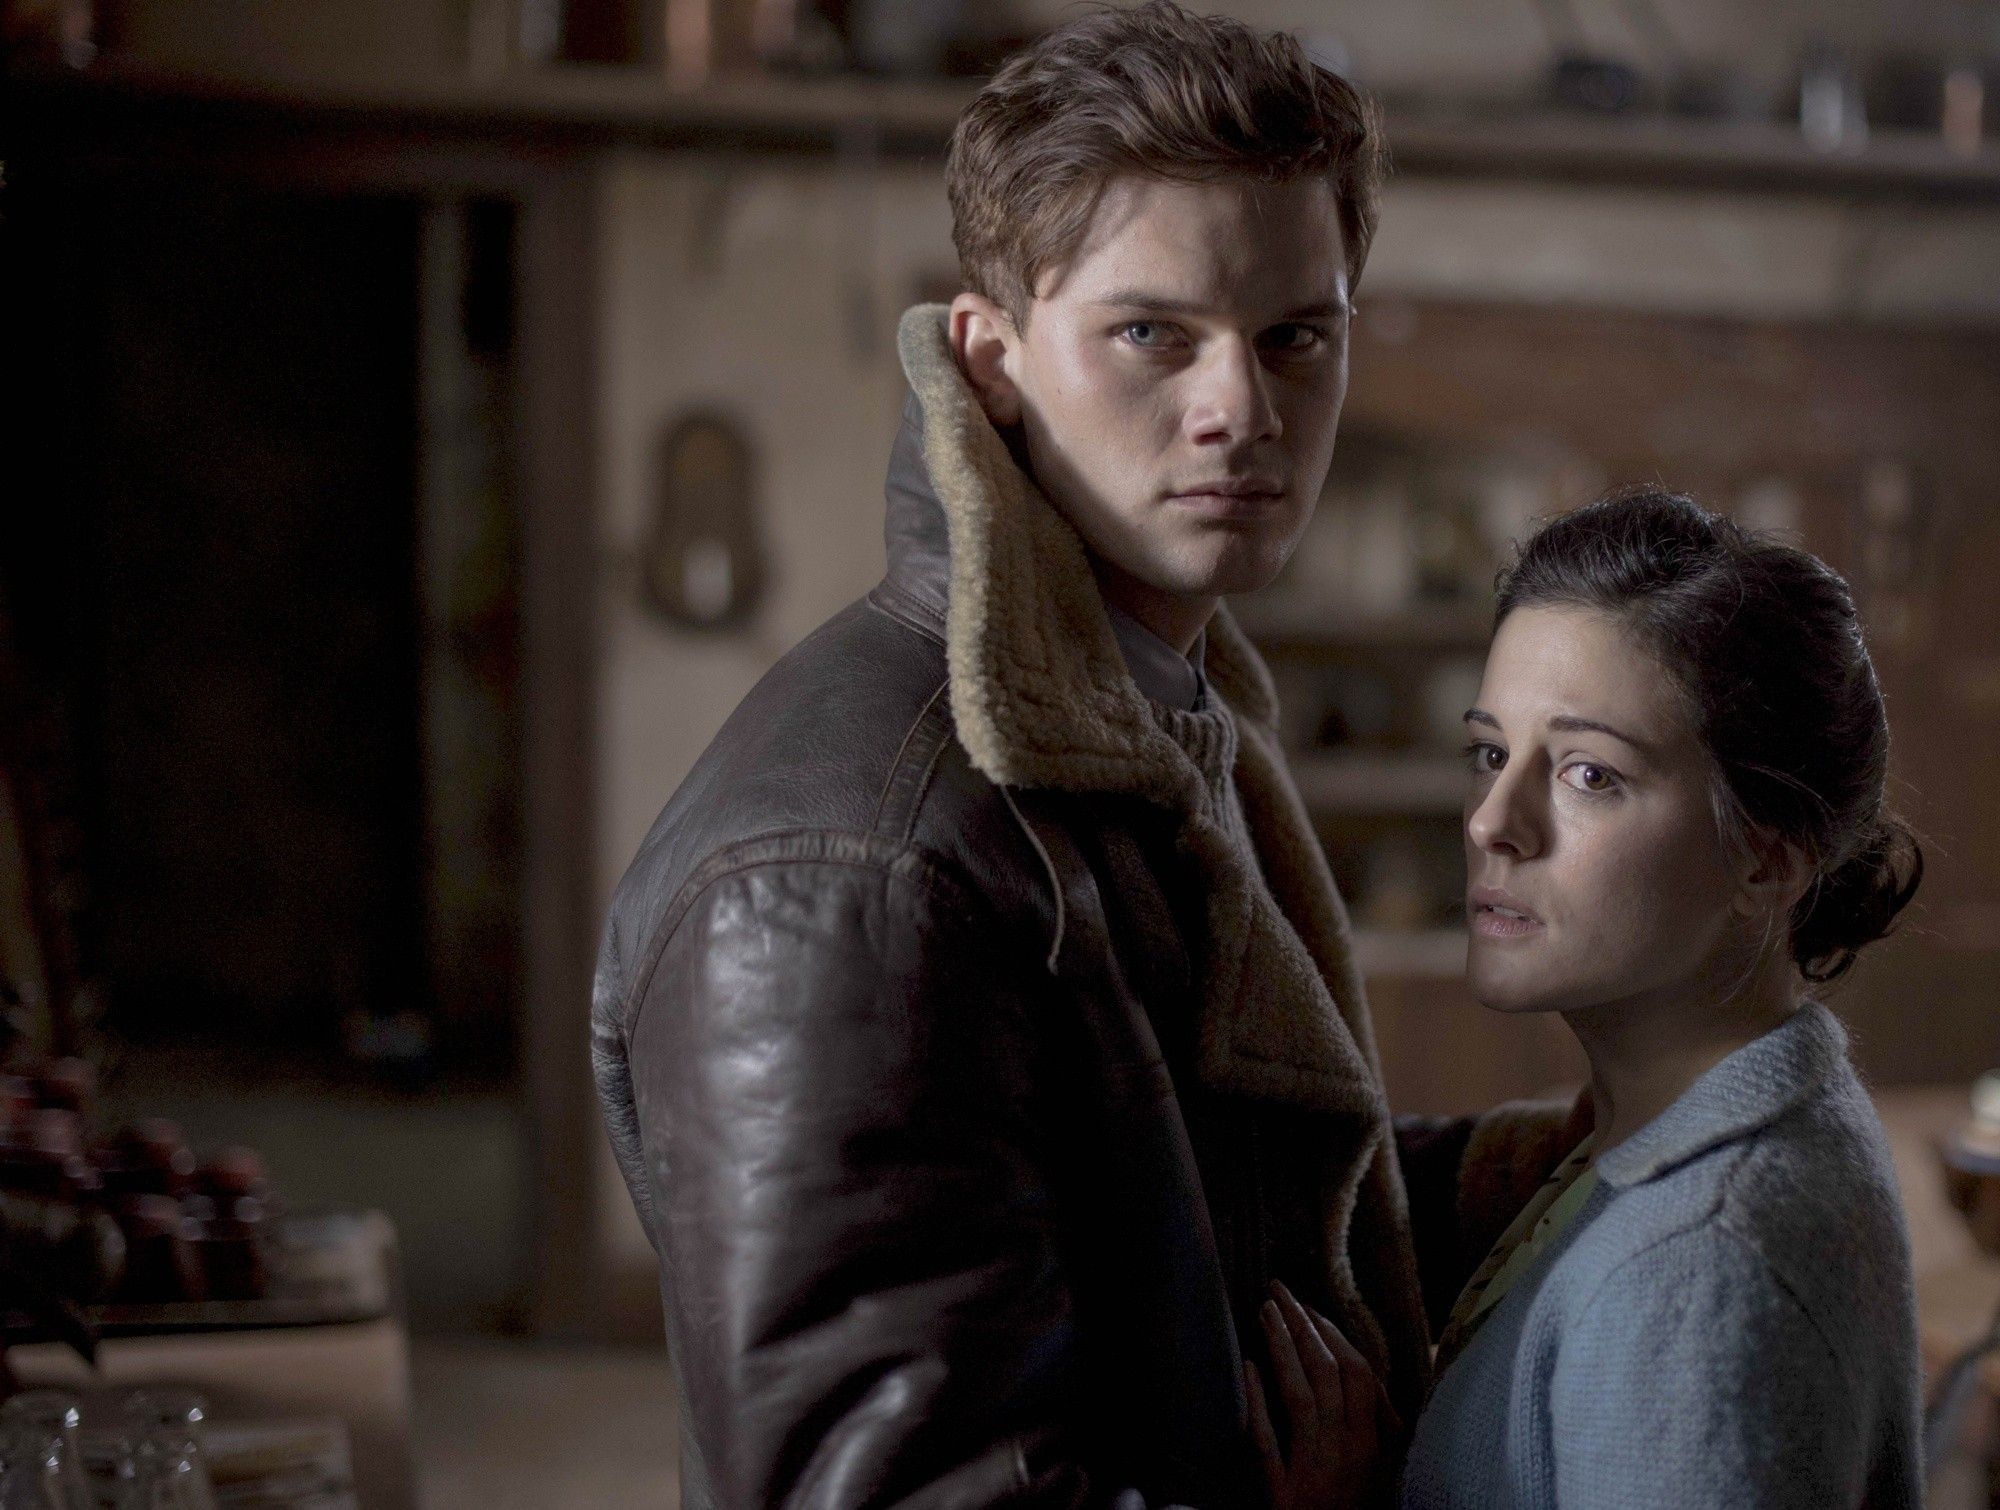 Jeremy Irvine stars as Harry Burnstow and Phoebe Fox stars as Eve Parkins in Relativity Media's The Woman in Black: Angel of Death (2015)